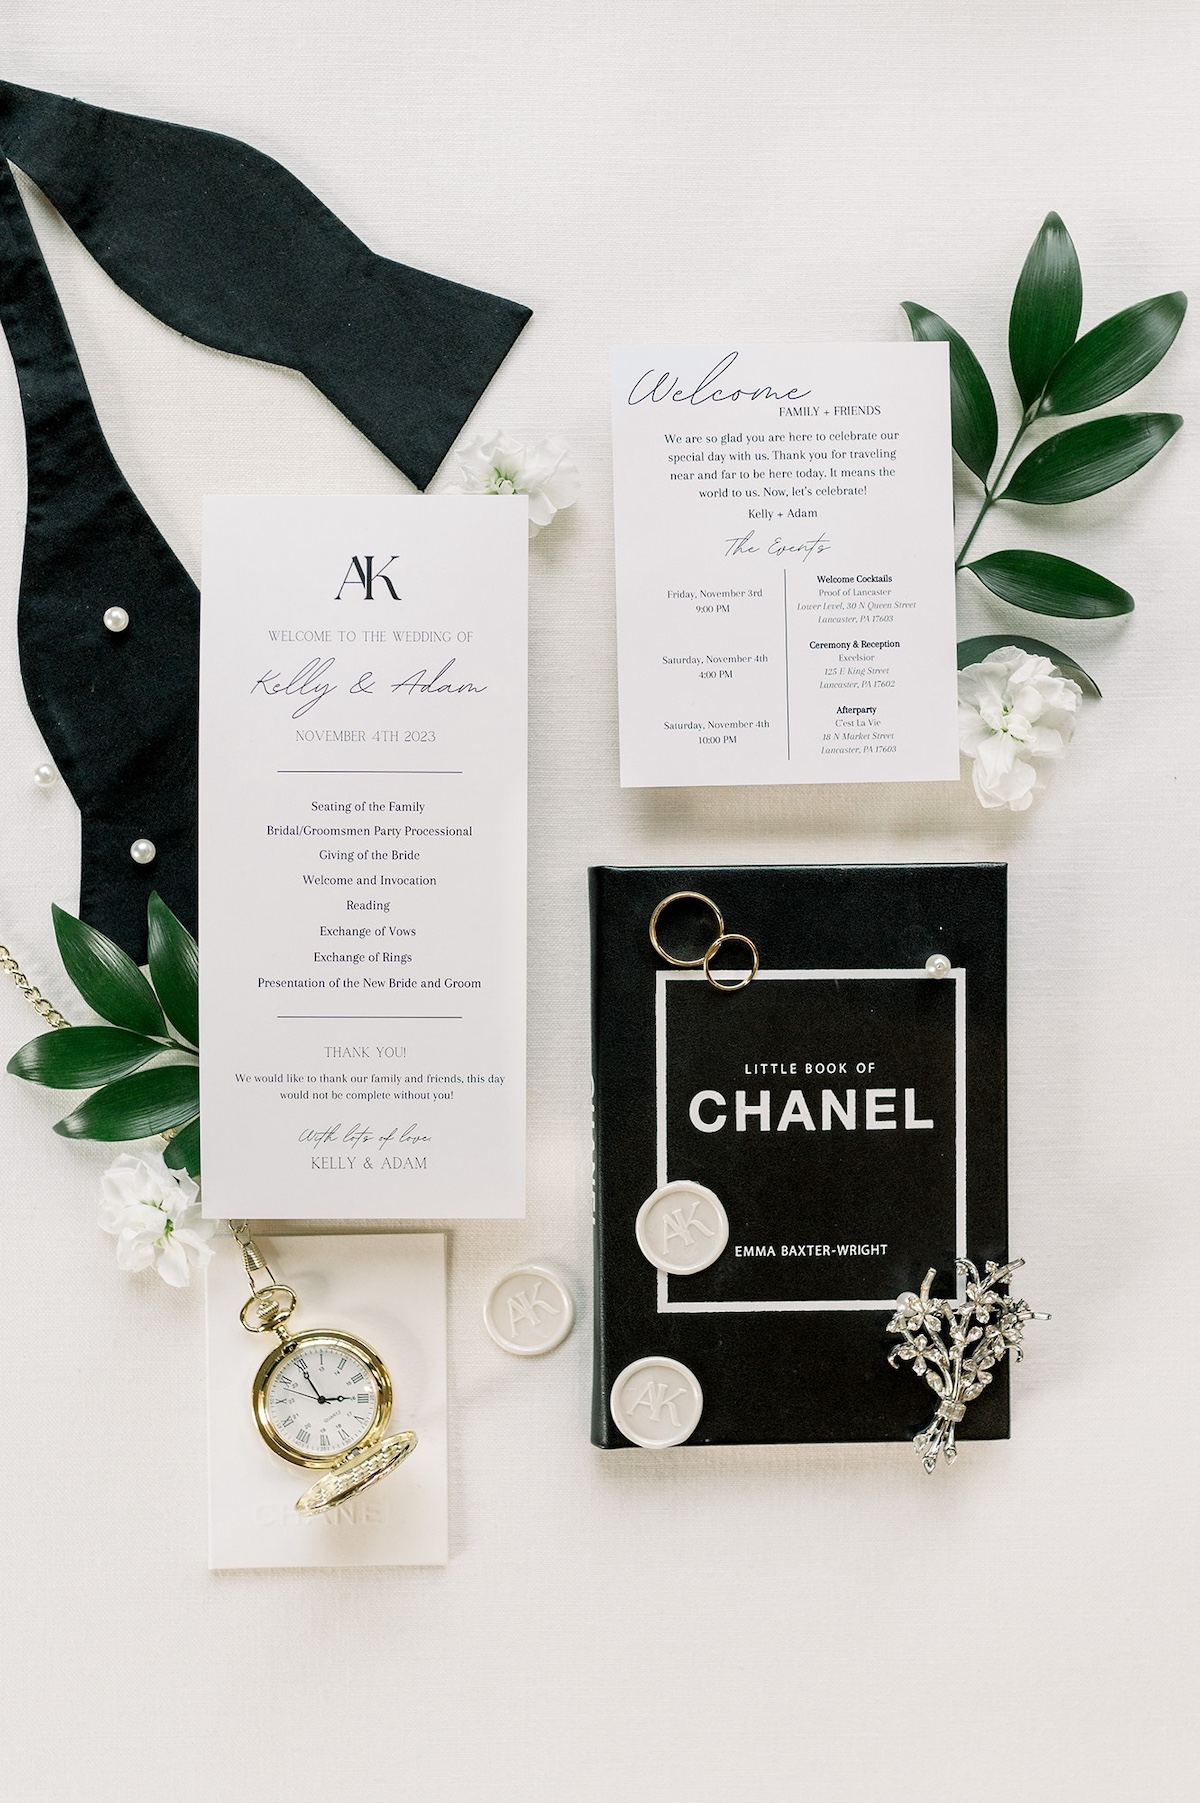 An enchanting flatlay arrangement highlighting the wedding program and sentimental keepsakes, telling the story of the day.